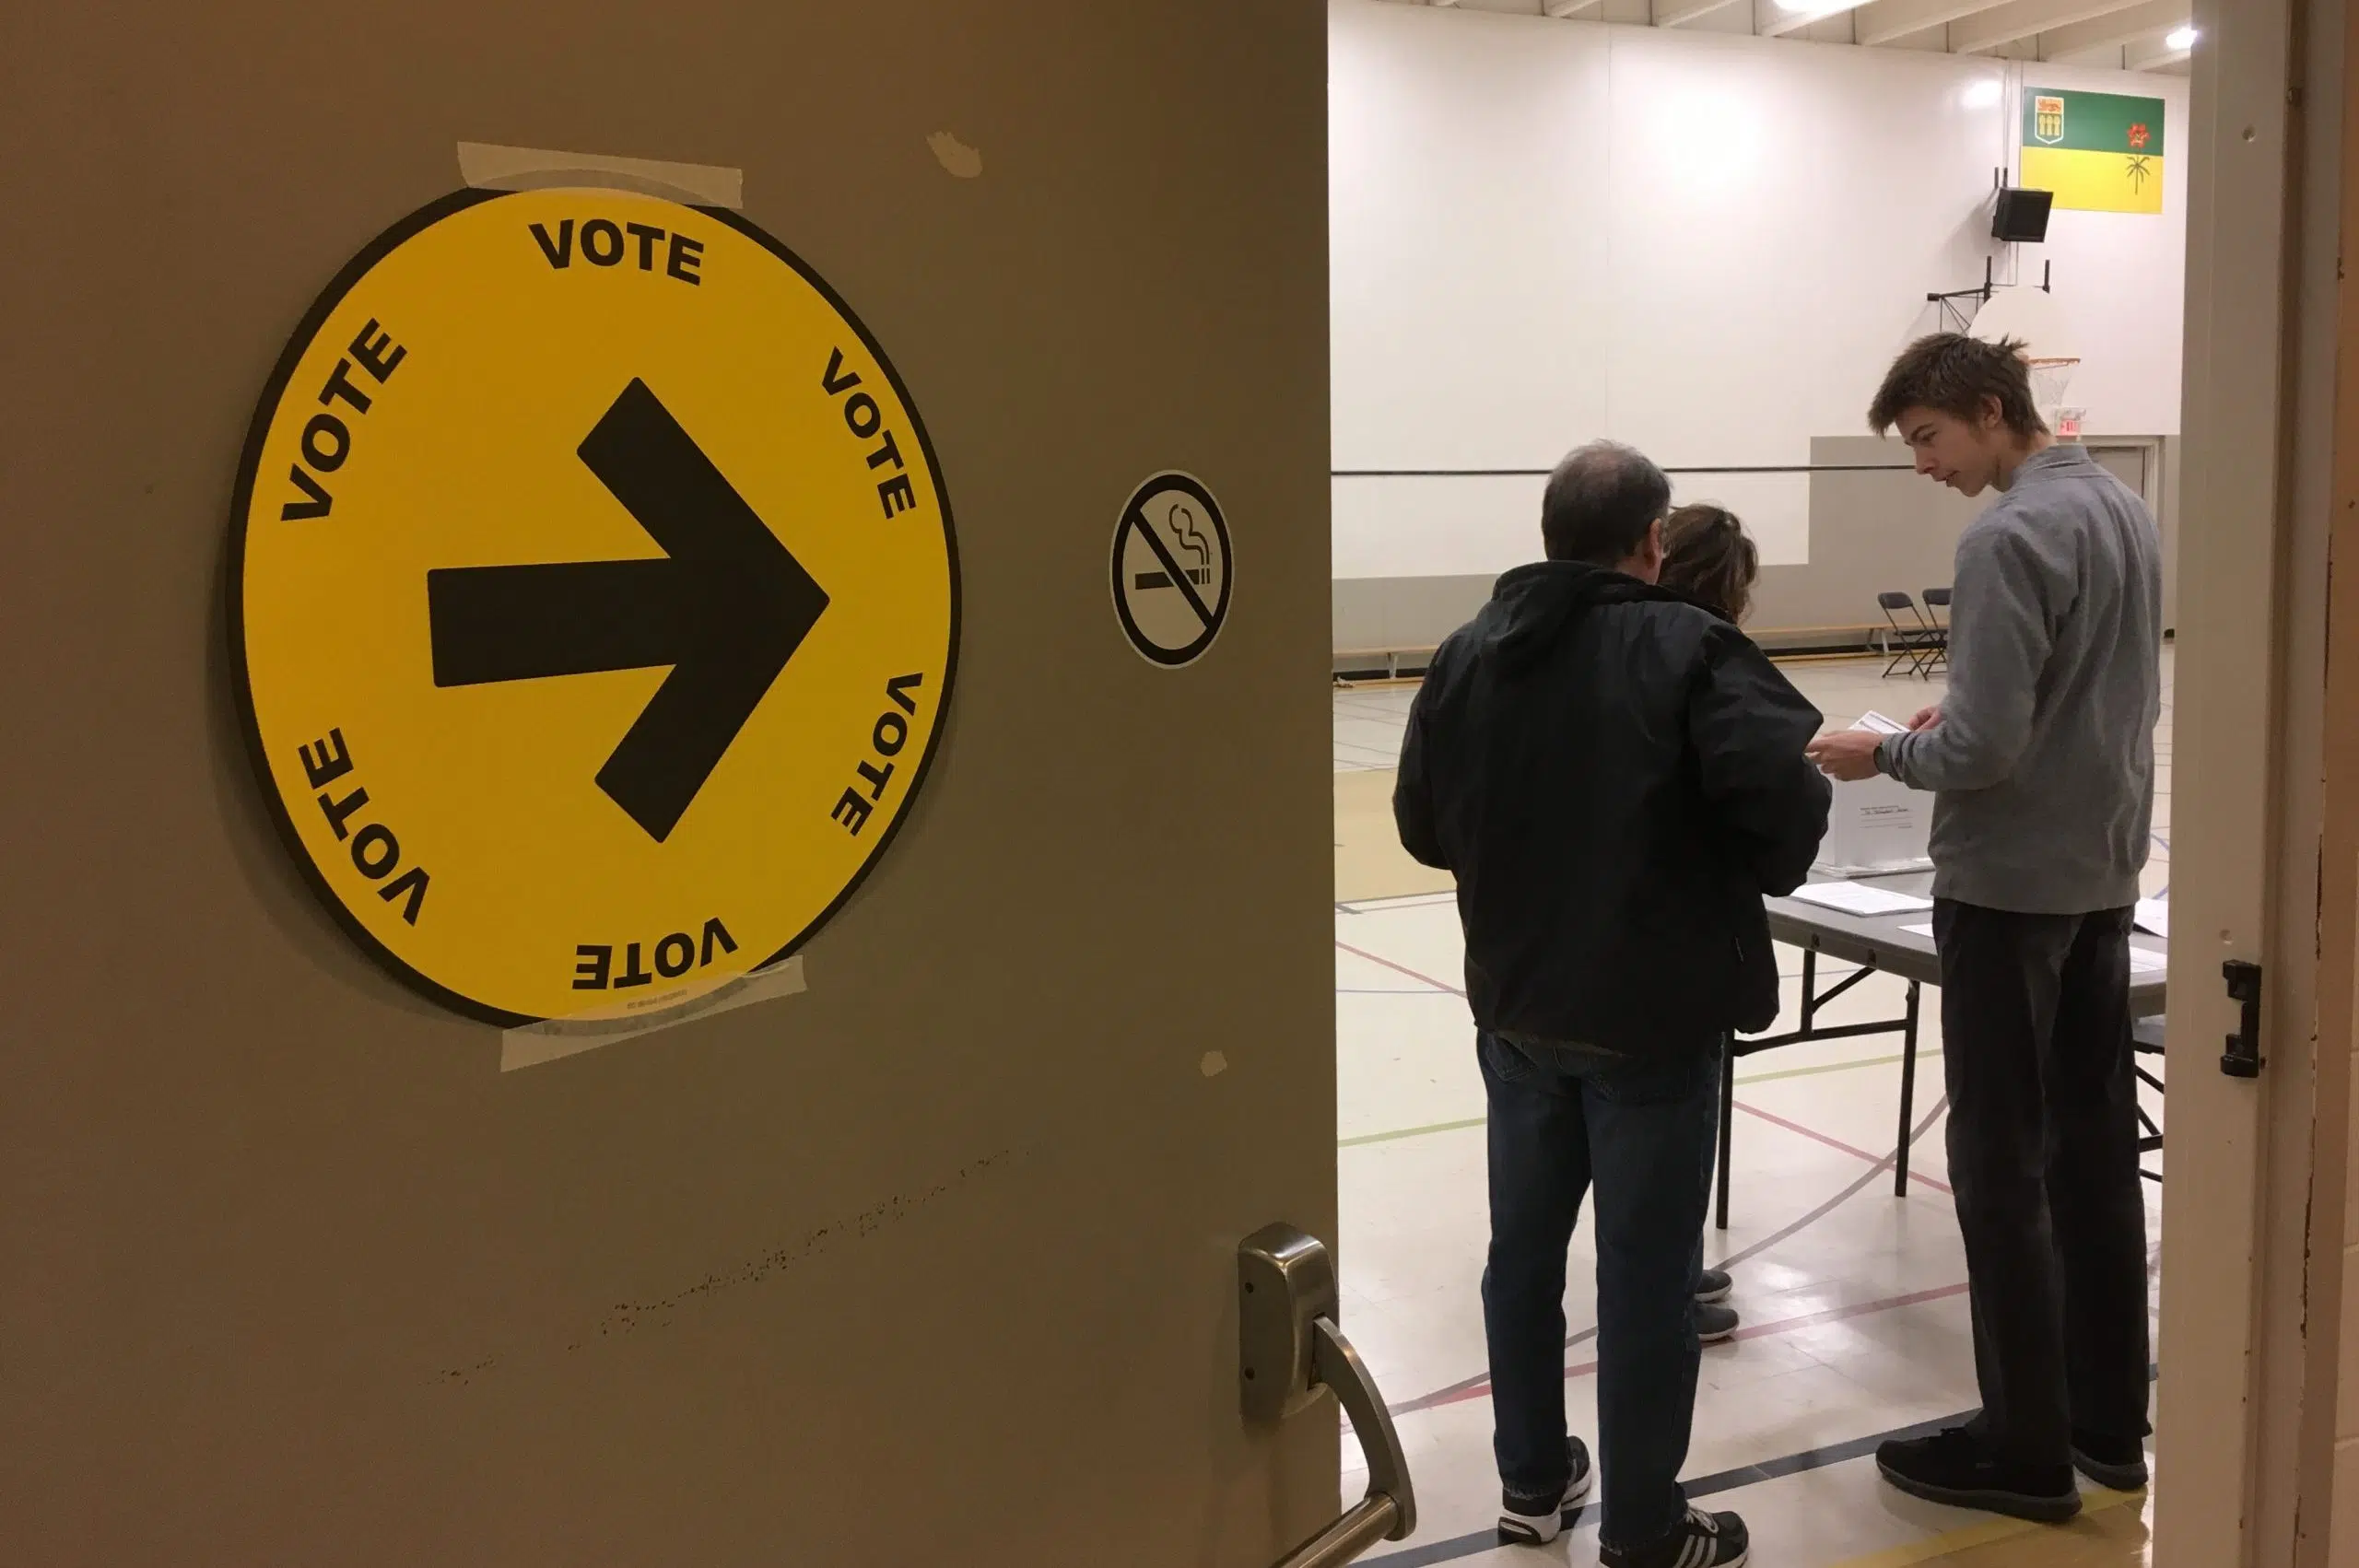 Significant increase in Saskatchewan advance voting numbers